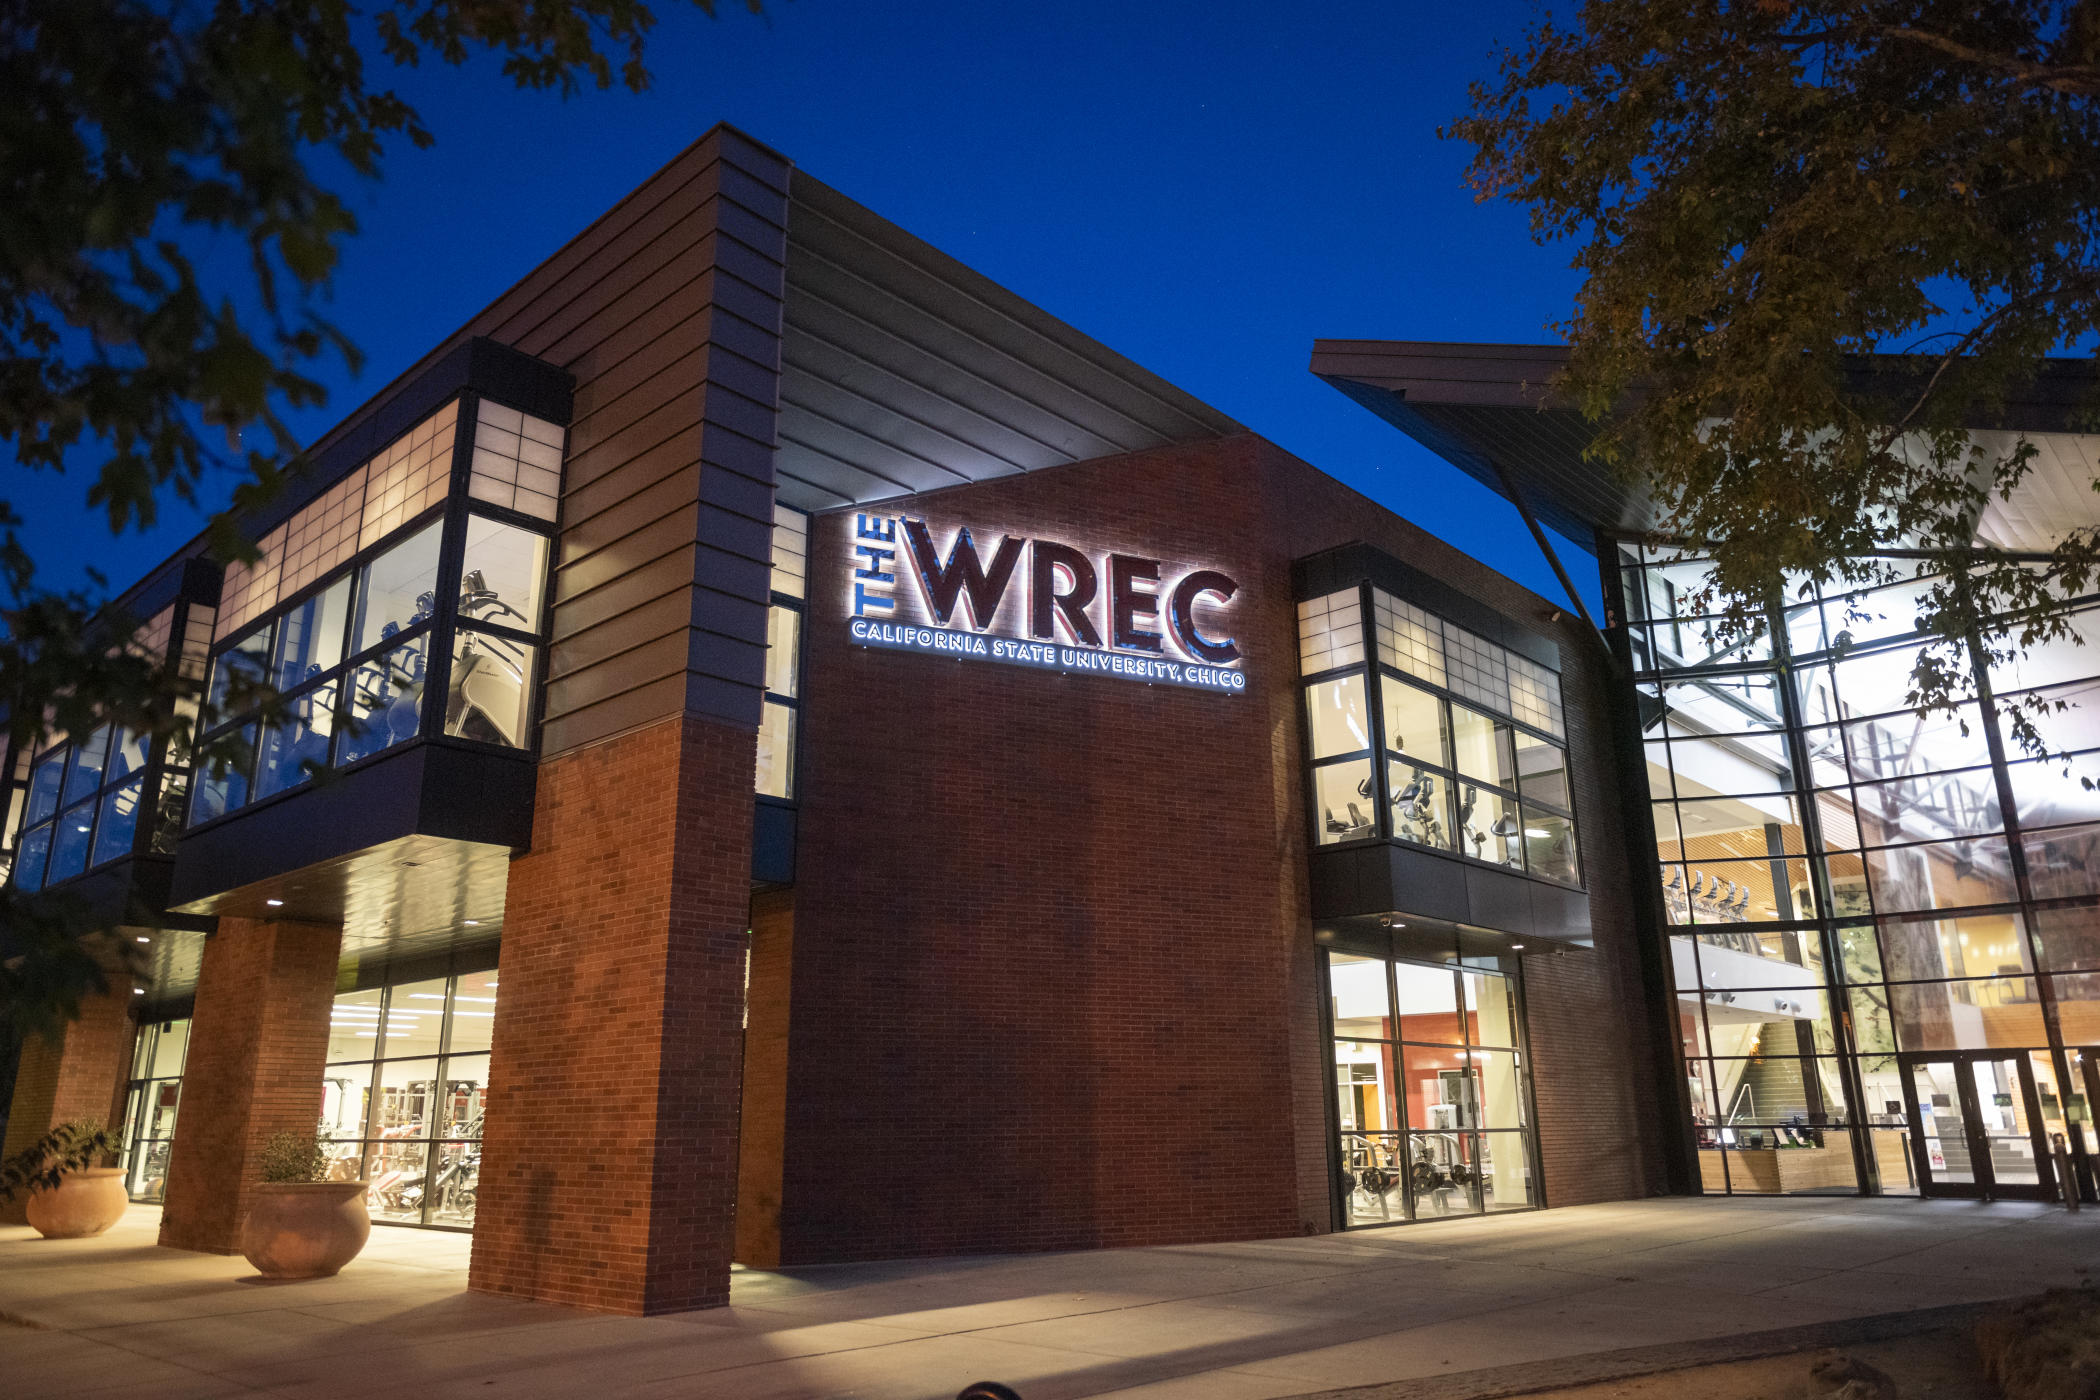 The WREC sign is illuminated at night, with views of the workout equipment visible through the windows.